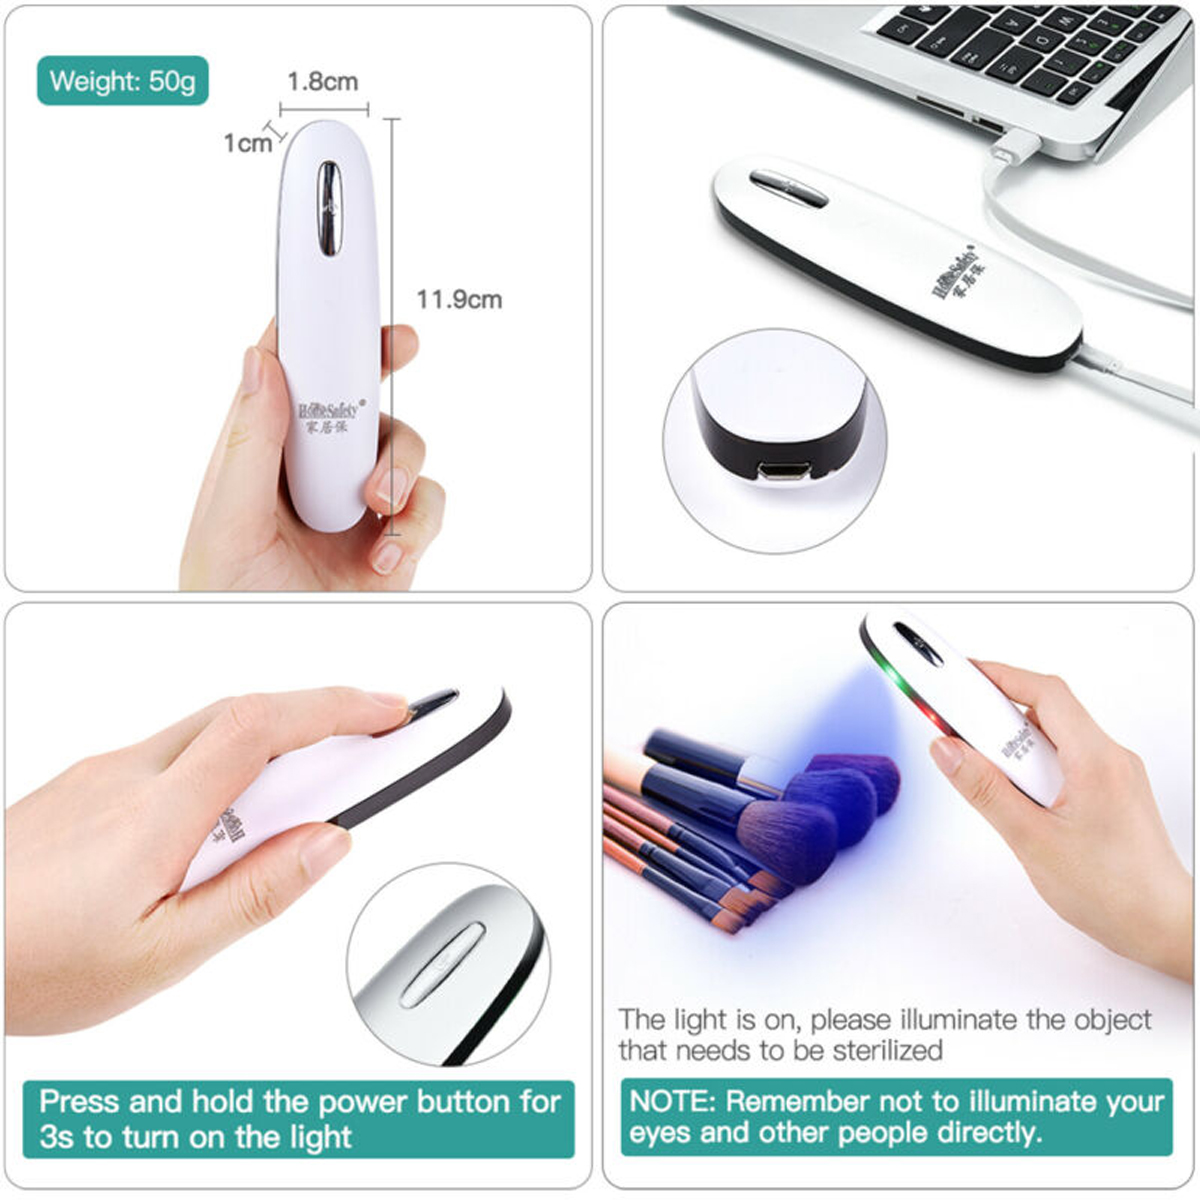 Portable-UV-Sterilizer-Lamp-LED-Electric-Ultraviolet-Disinfector-Light-For-Computer-Phone-Cosmetic-C-1651050-3